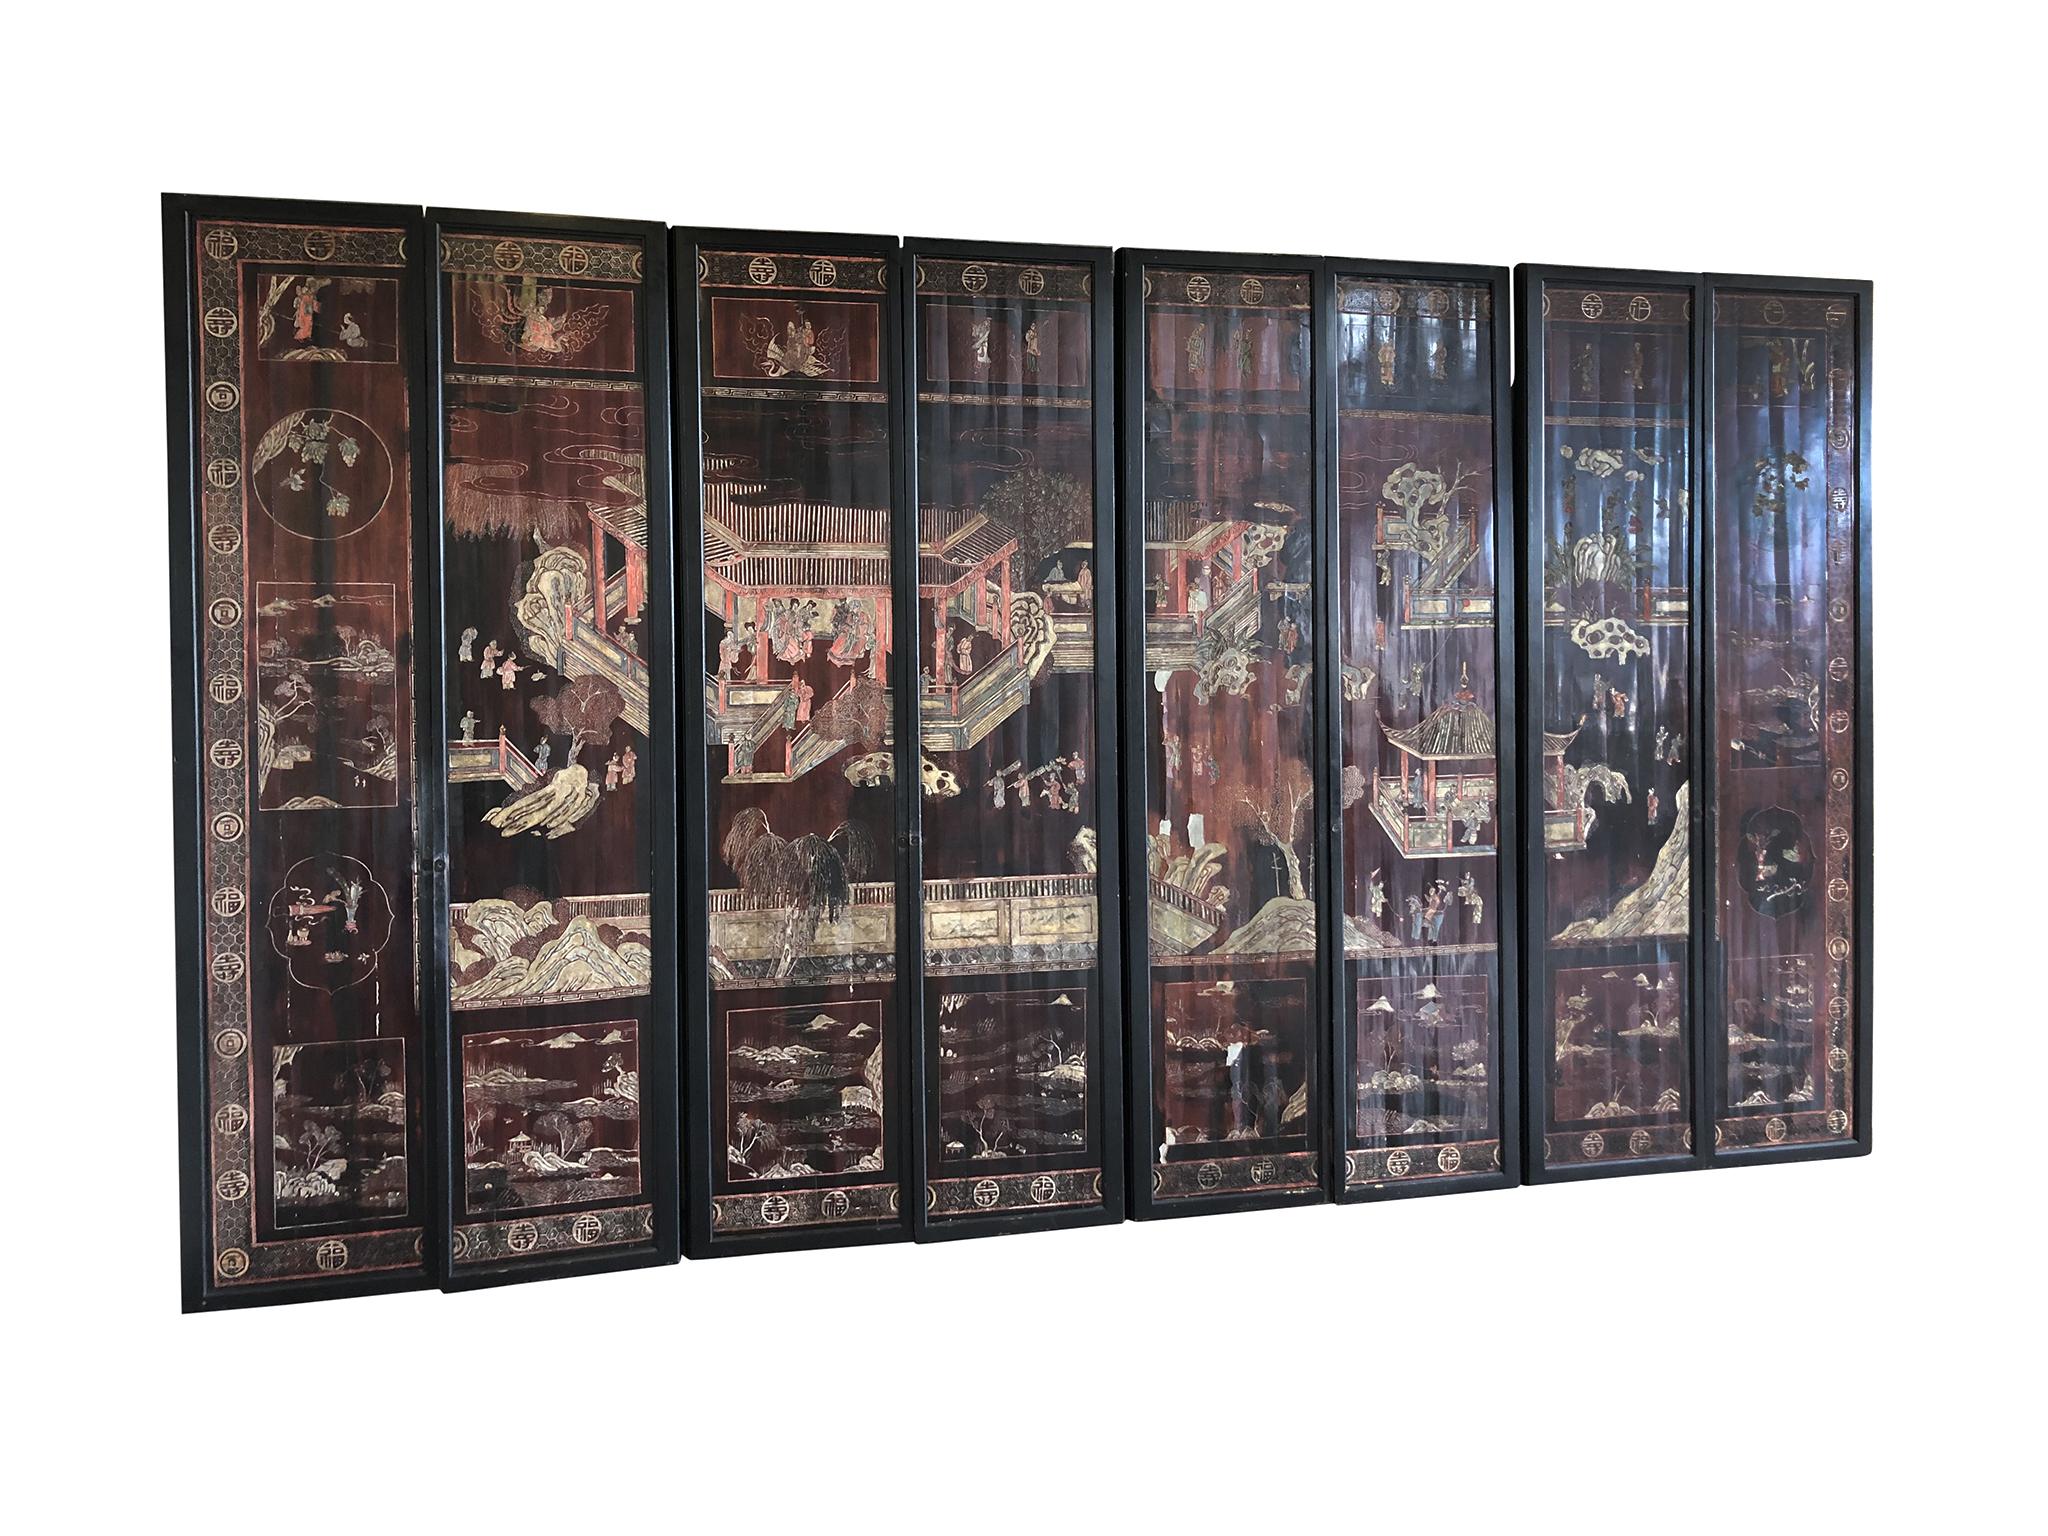 An exquisite late 19th century Chinese screen. It is comprised of eight individual hand painted panels with lacquered coromandel. The panels' design is expertly rendered in intaglio and painted in with enamel. What unfolds on these panels is a